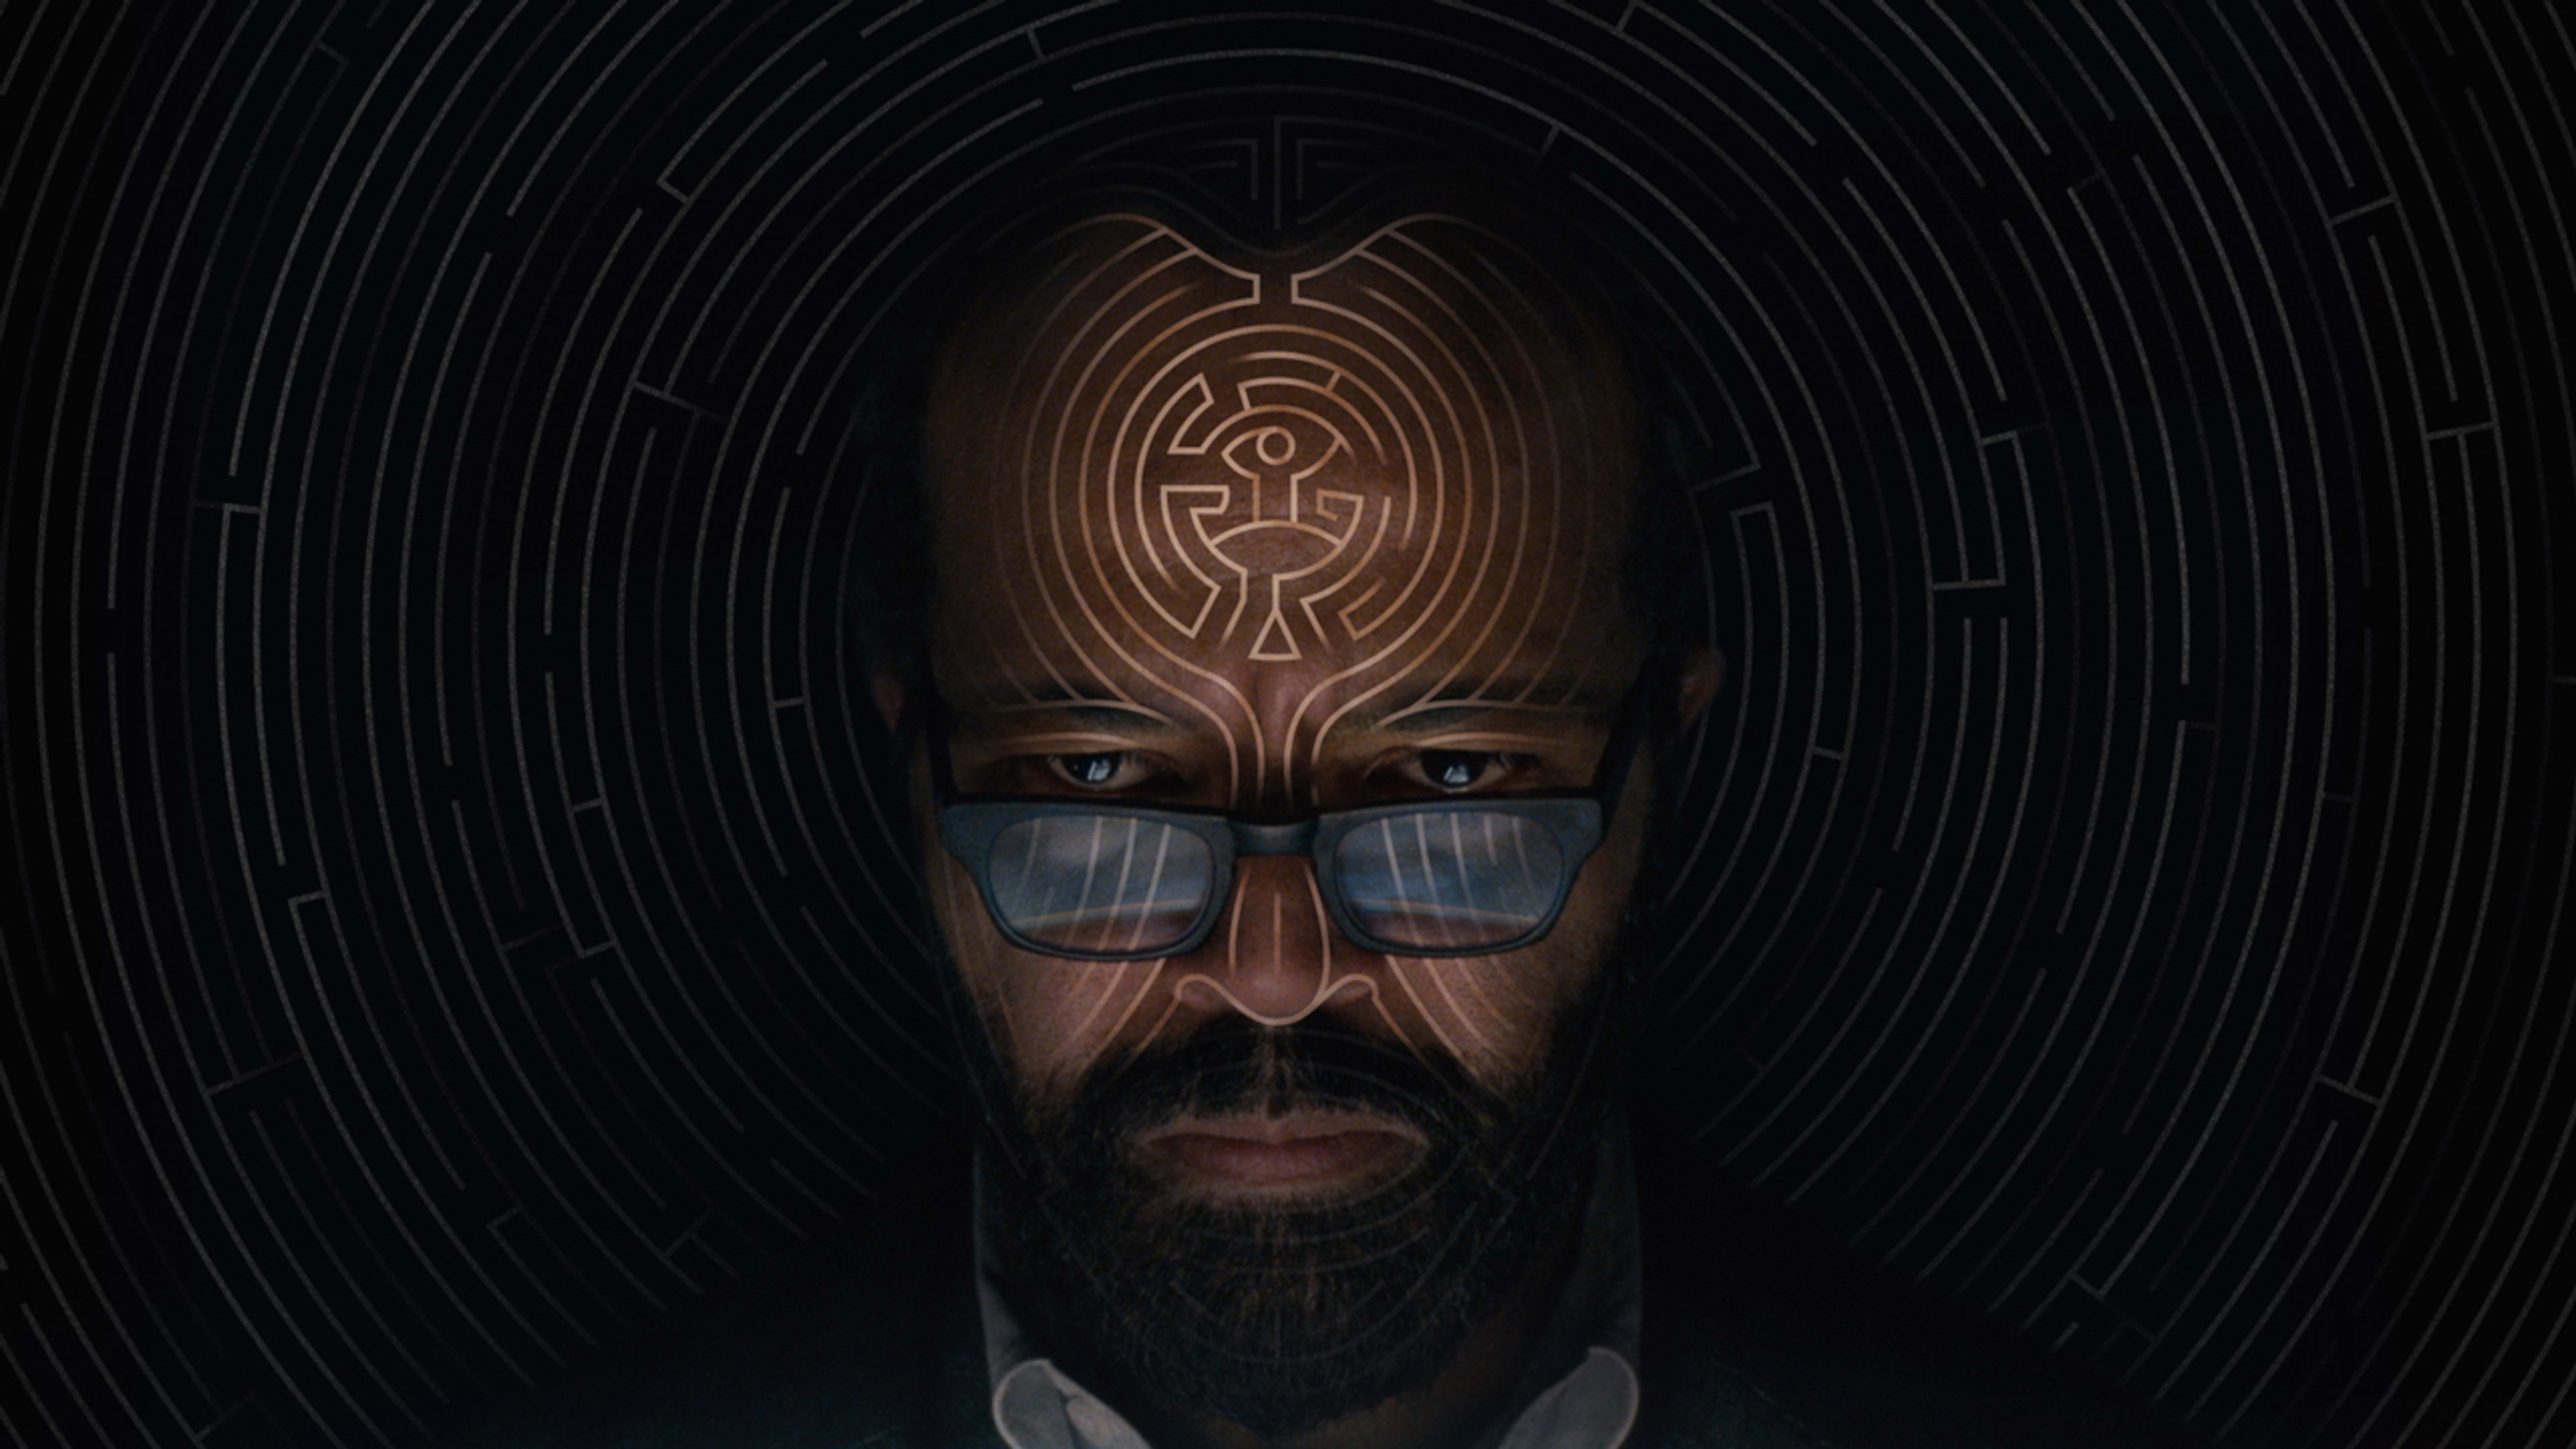 You too can be a “Westworld” AI with this new Alexa game